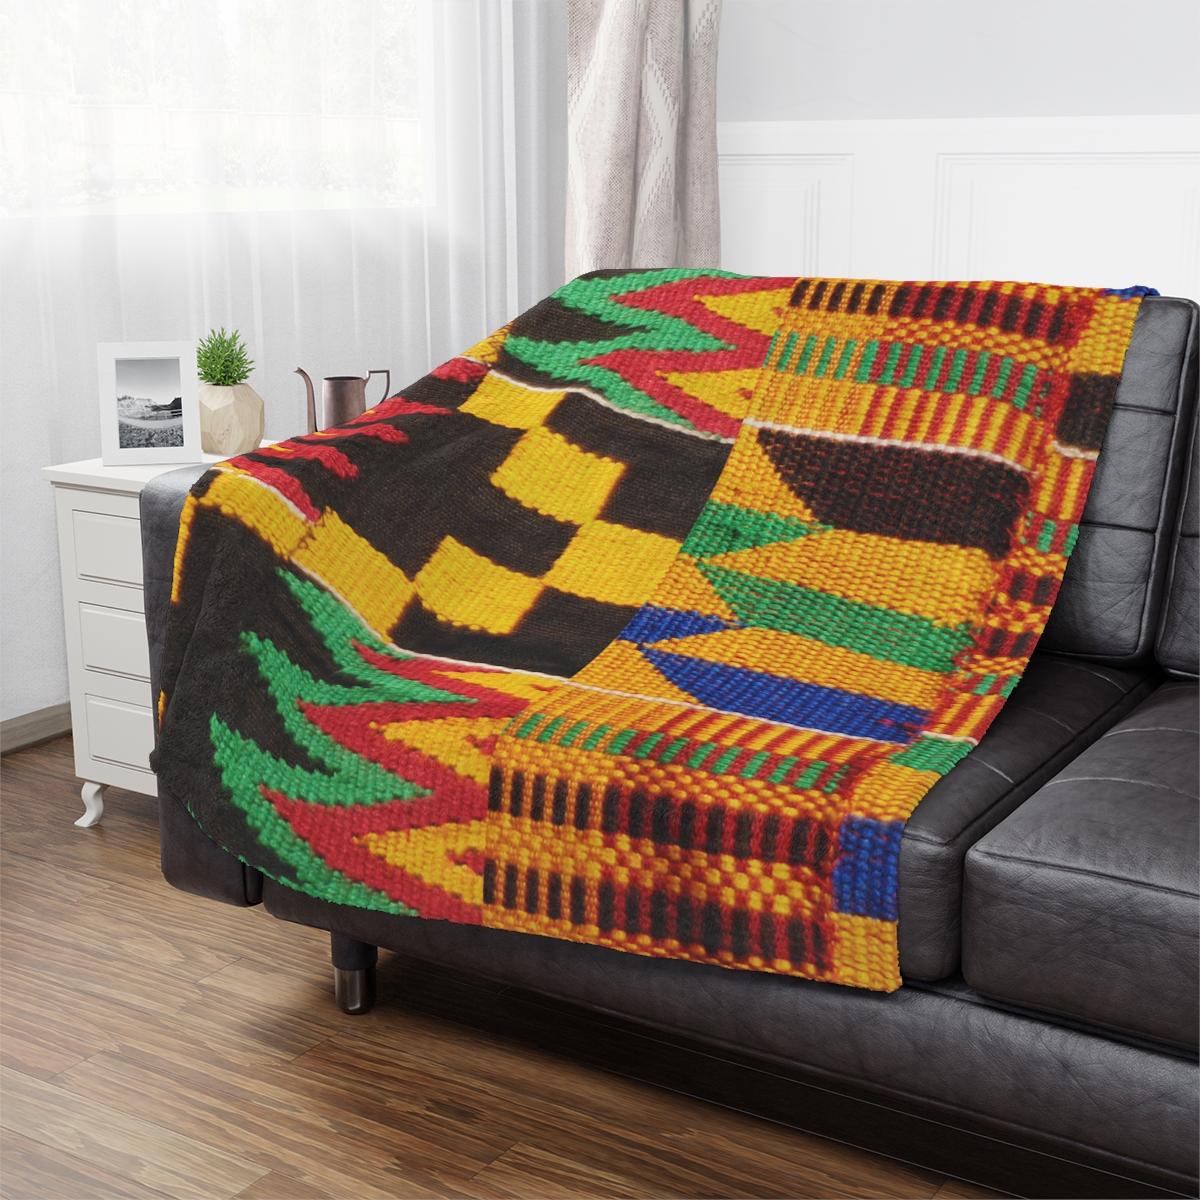 Queen Mother Microfiber Blanket product thumbnail image